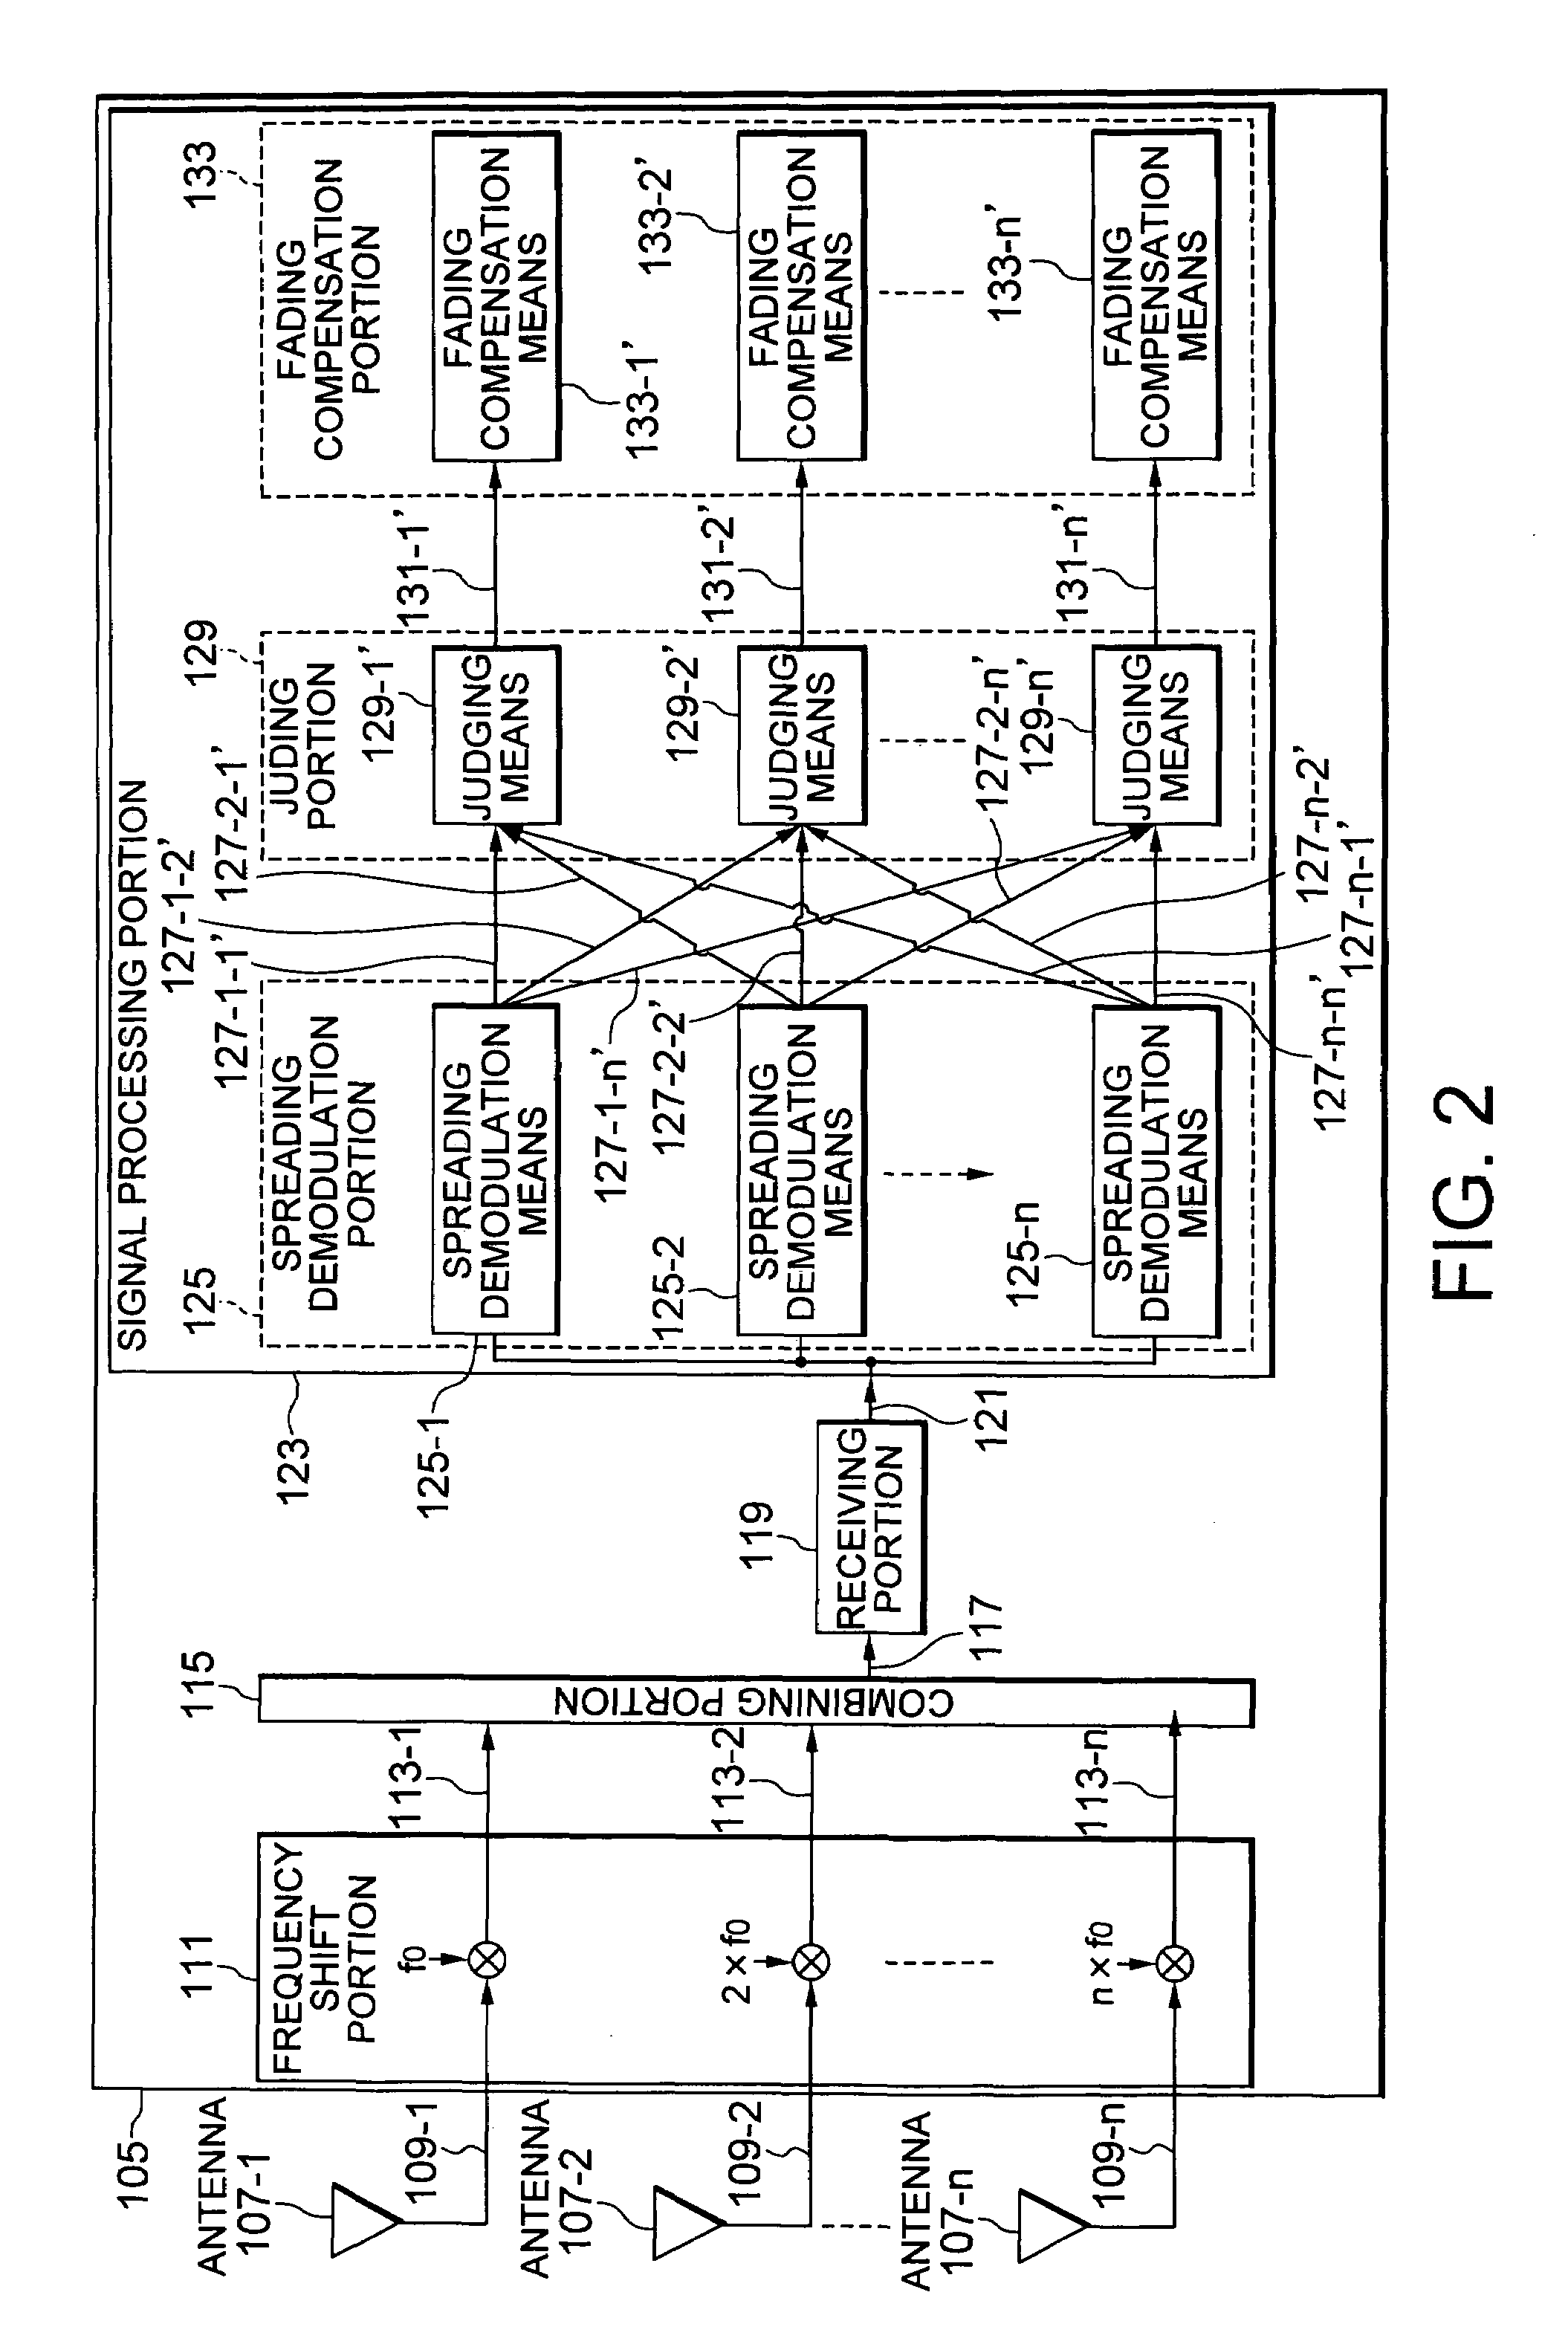 Mobile communication system having mobile stations and a base station